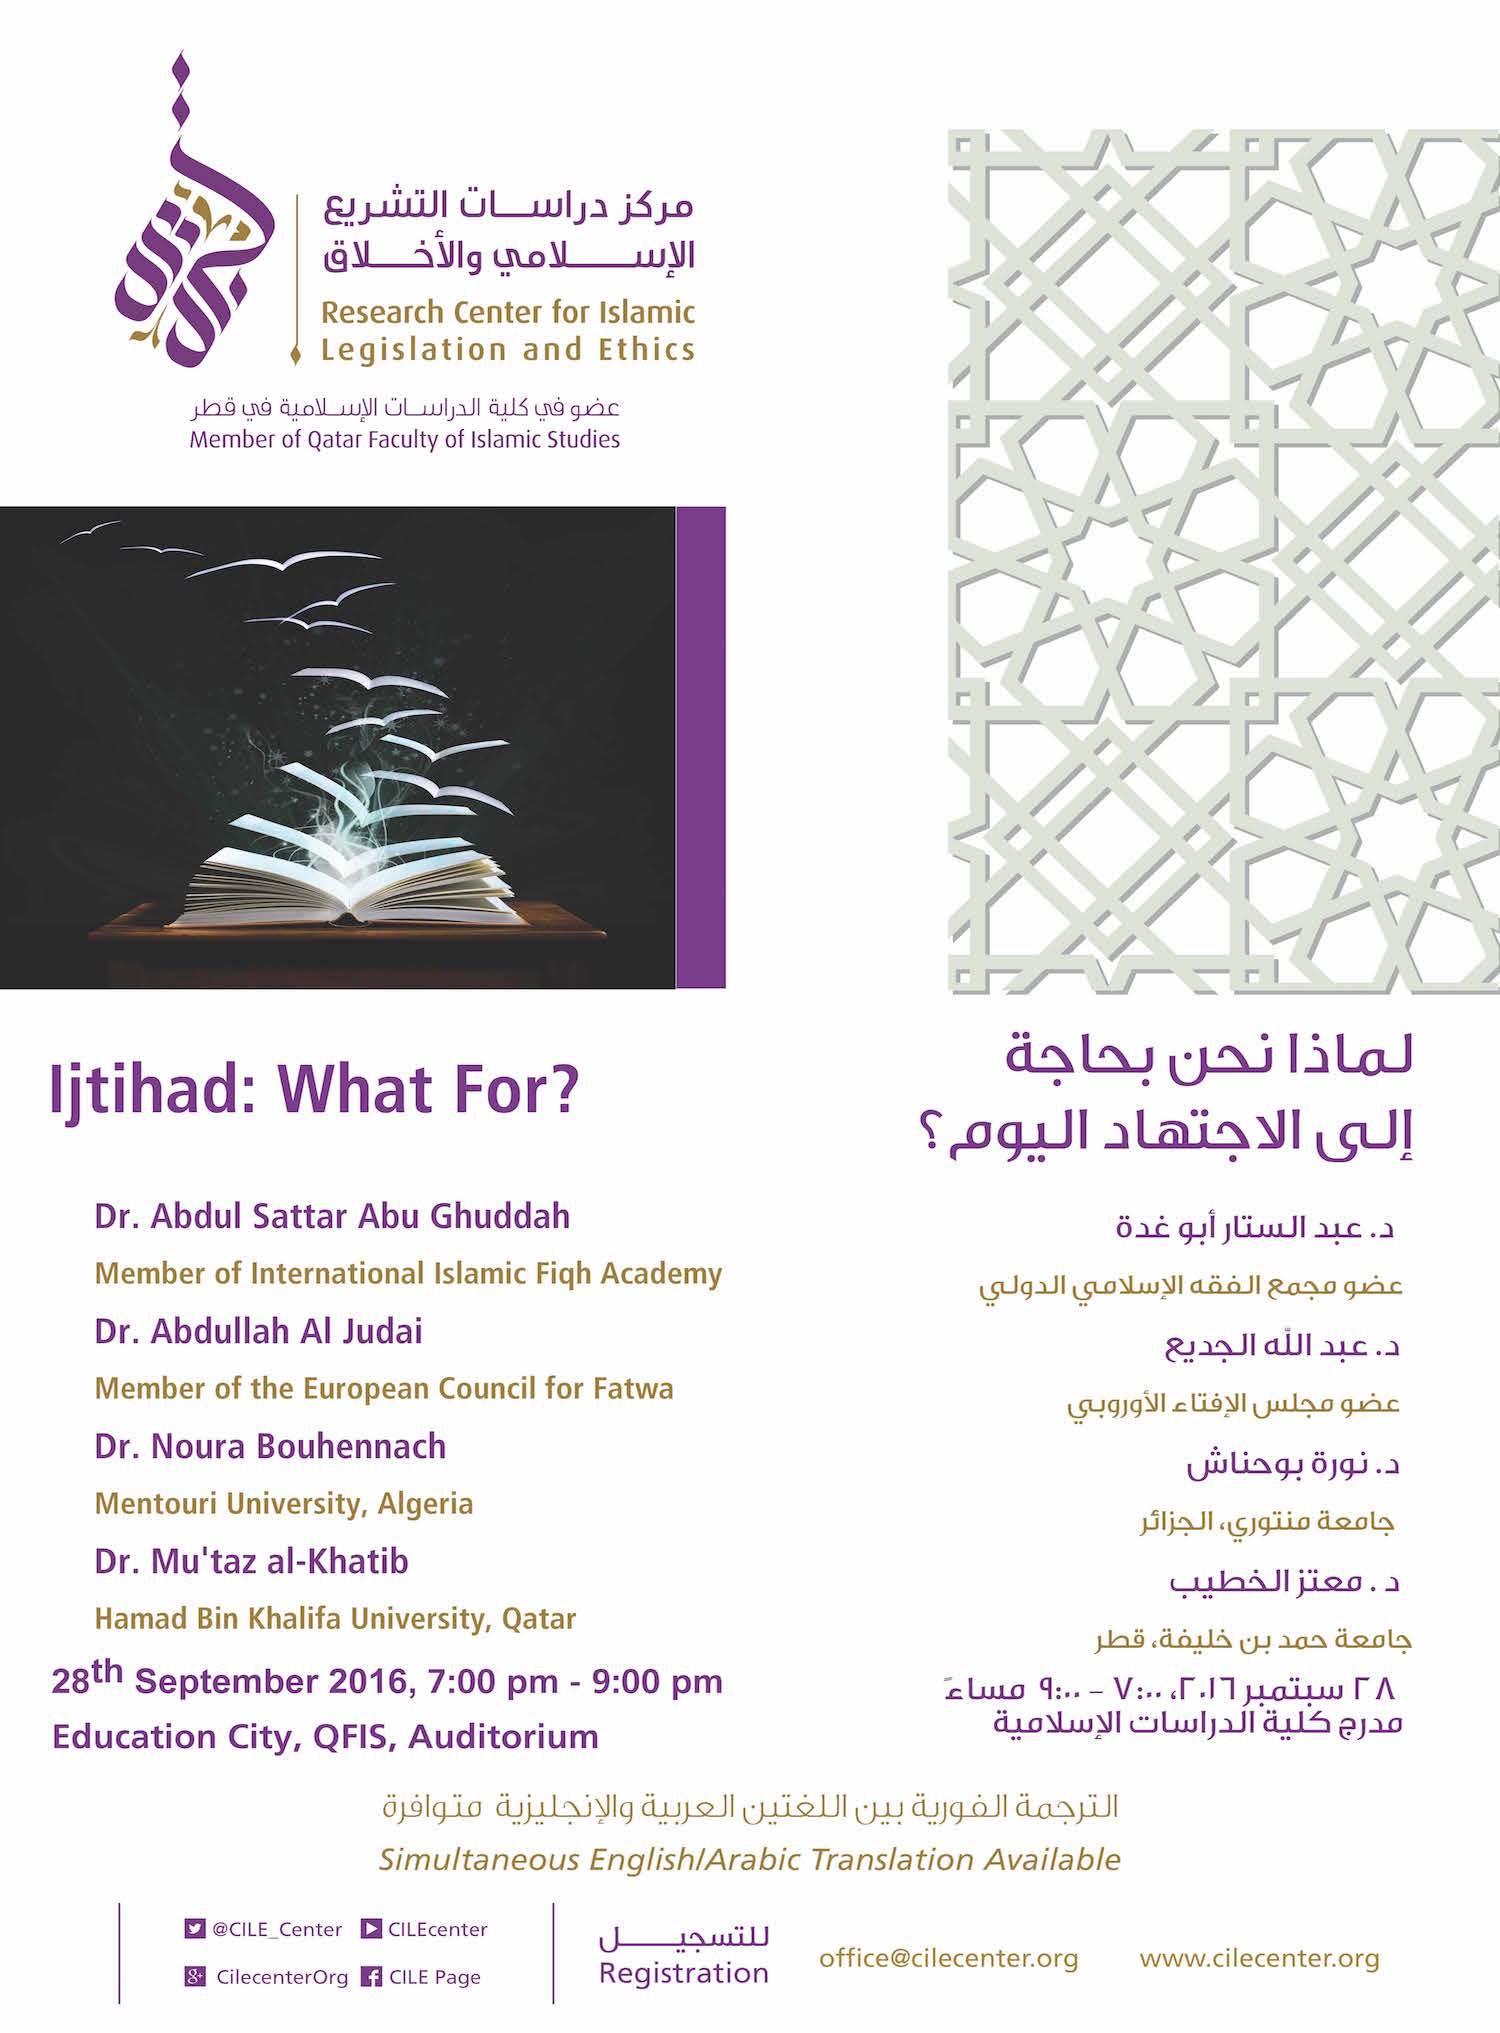 Public Lecture "Ijtihad: What For?"